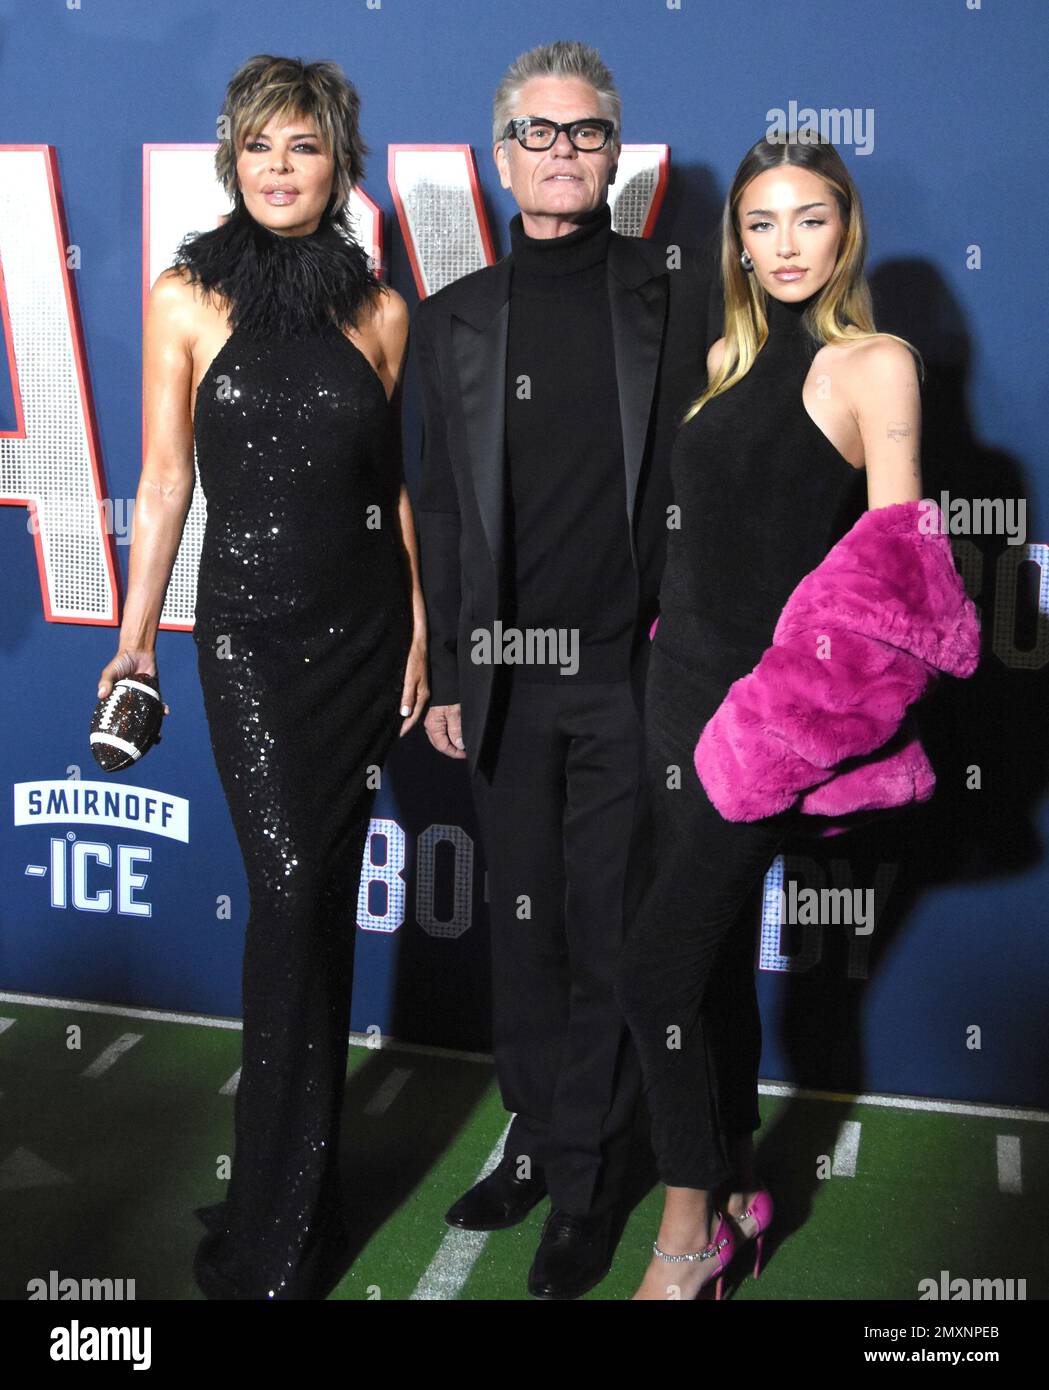 Los Angeles, California, USA 31st January 2023 Actress Lisa Rinna, Actor Harry Hamlin and daughter Actress Delilah Belle Hamlin attend the Los Angeles Premiere Screening of Paramount Pictures' '80 for Brady' at Regency Village Theatre on January 31, 2023 in Los Angeles, California, USA. Photo by Barry King/Alamy Stock Photo Stock Photo